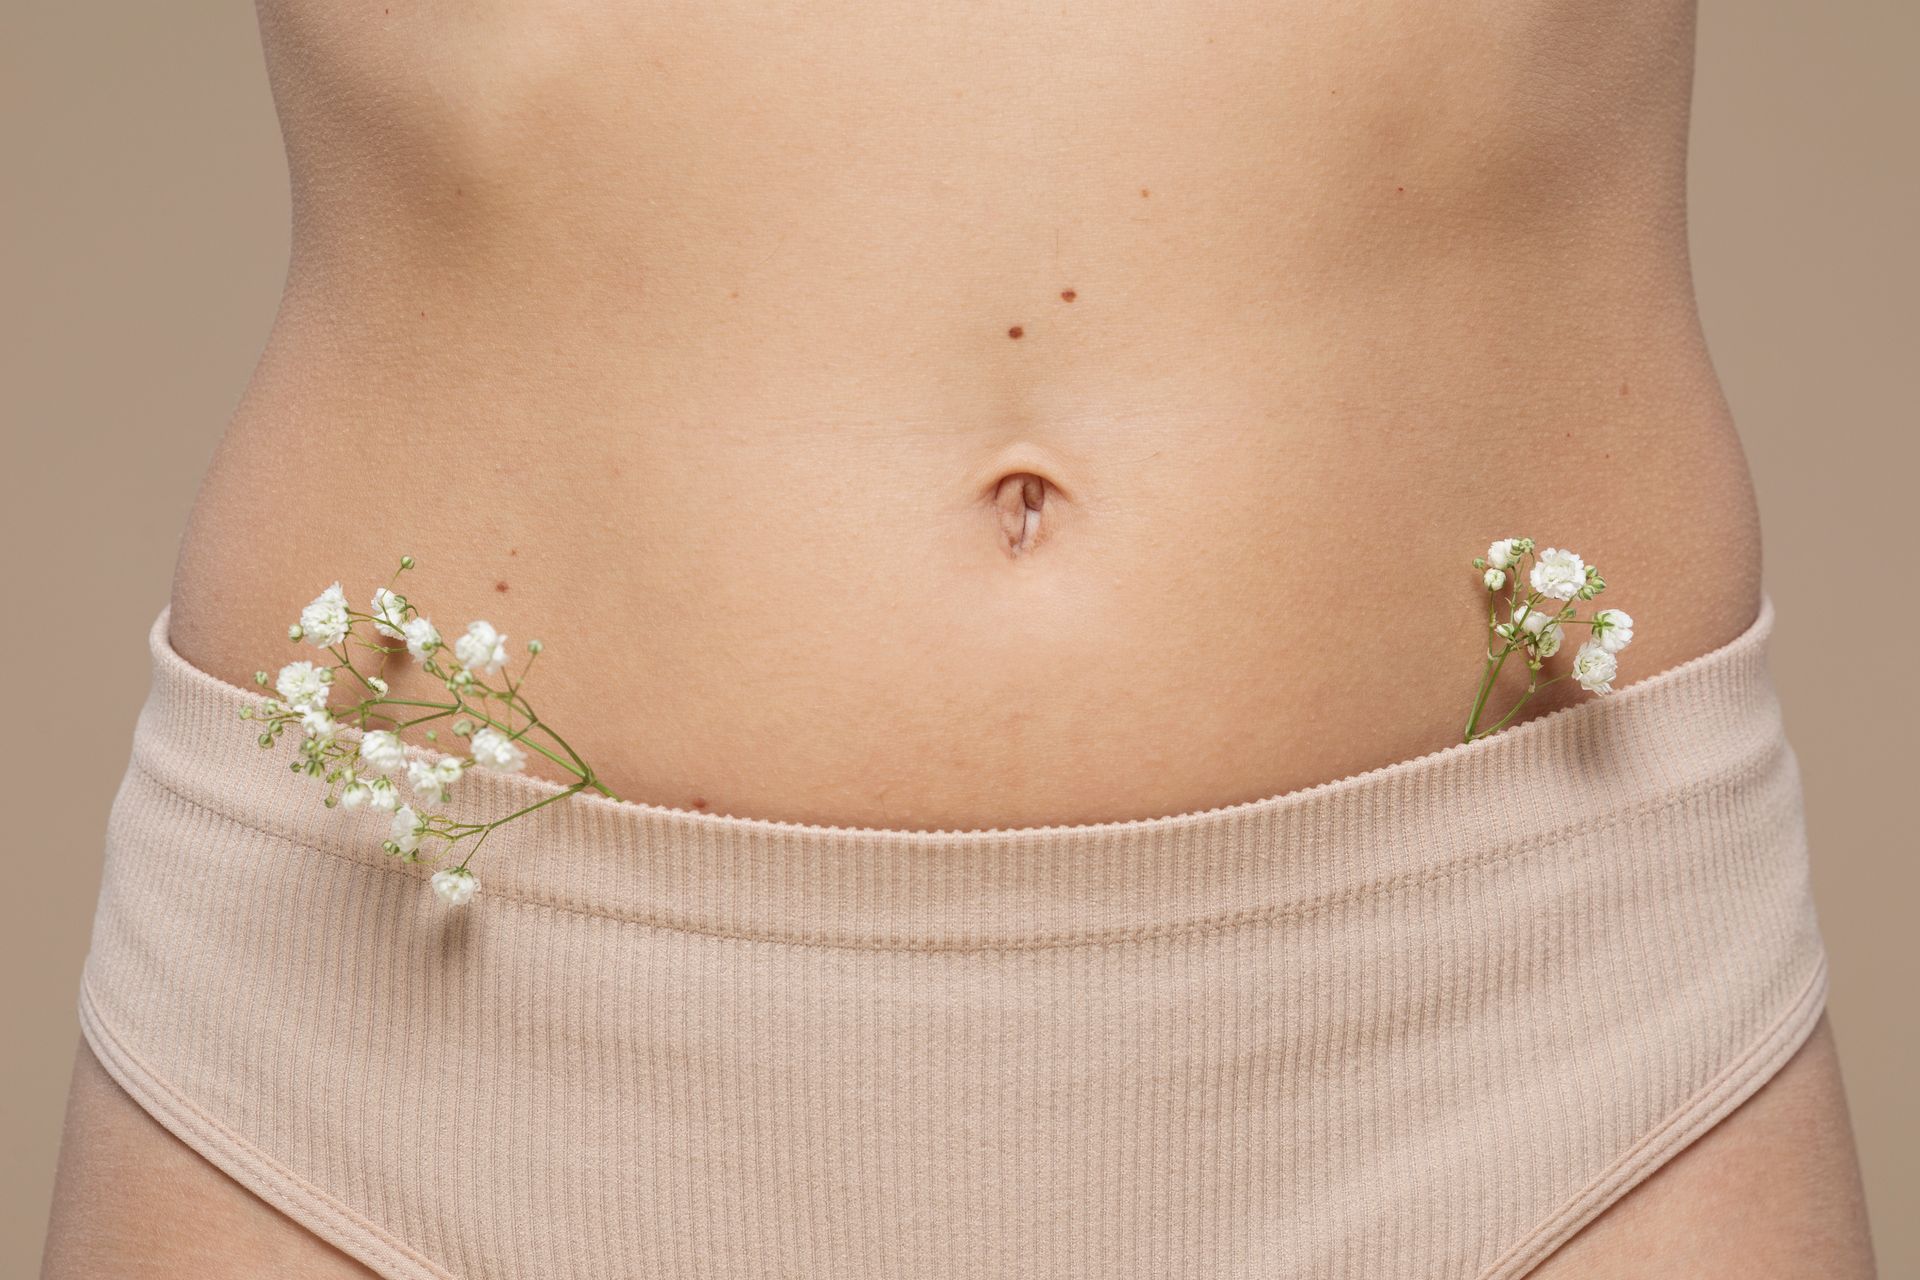 a close up of a woman 's stomach with flowers on it